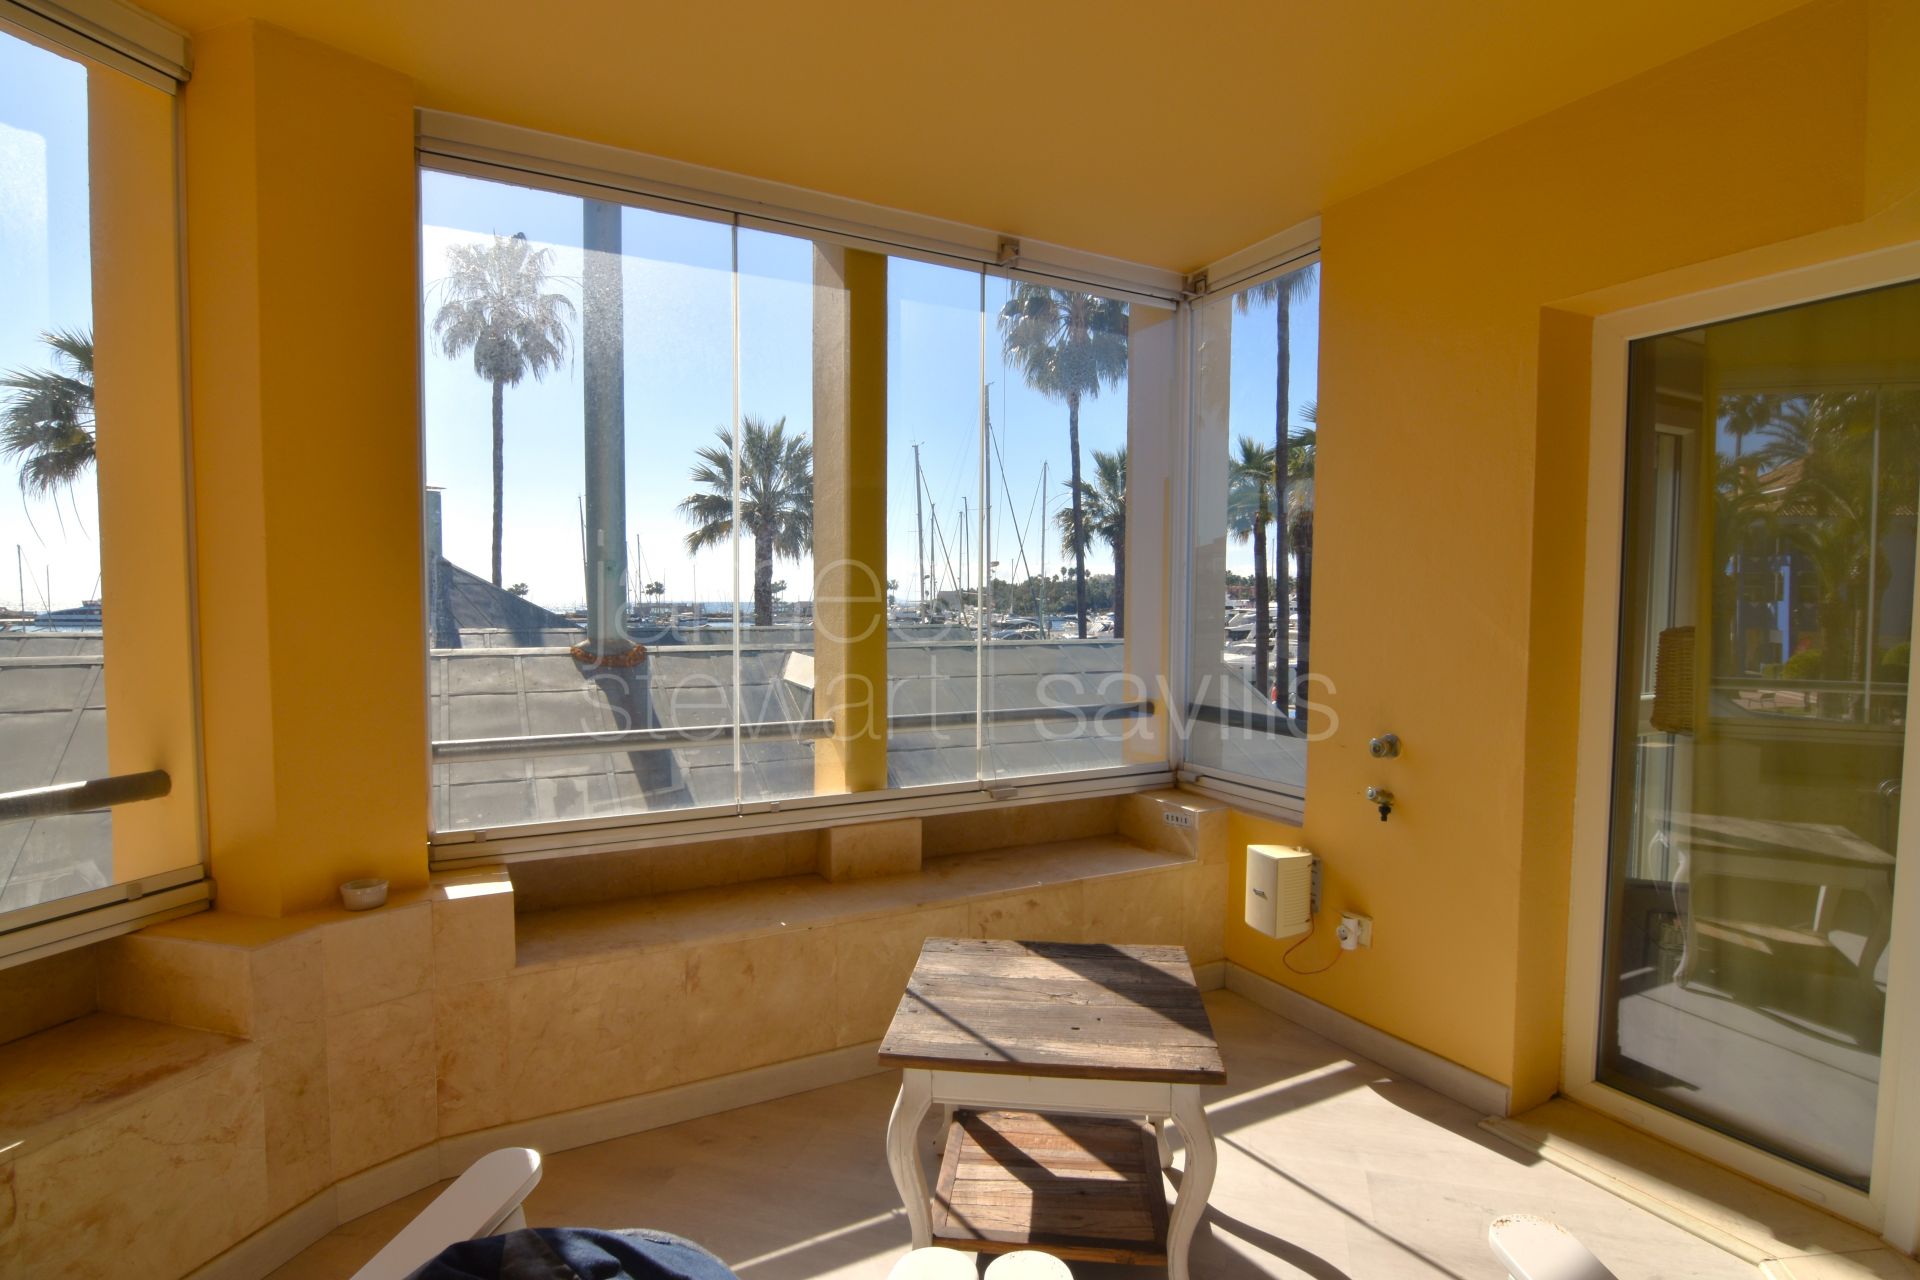 Marina apartment overlooking the Puerto Deportivo of Sotogrande and the Rock of Gibraltar